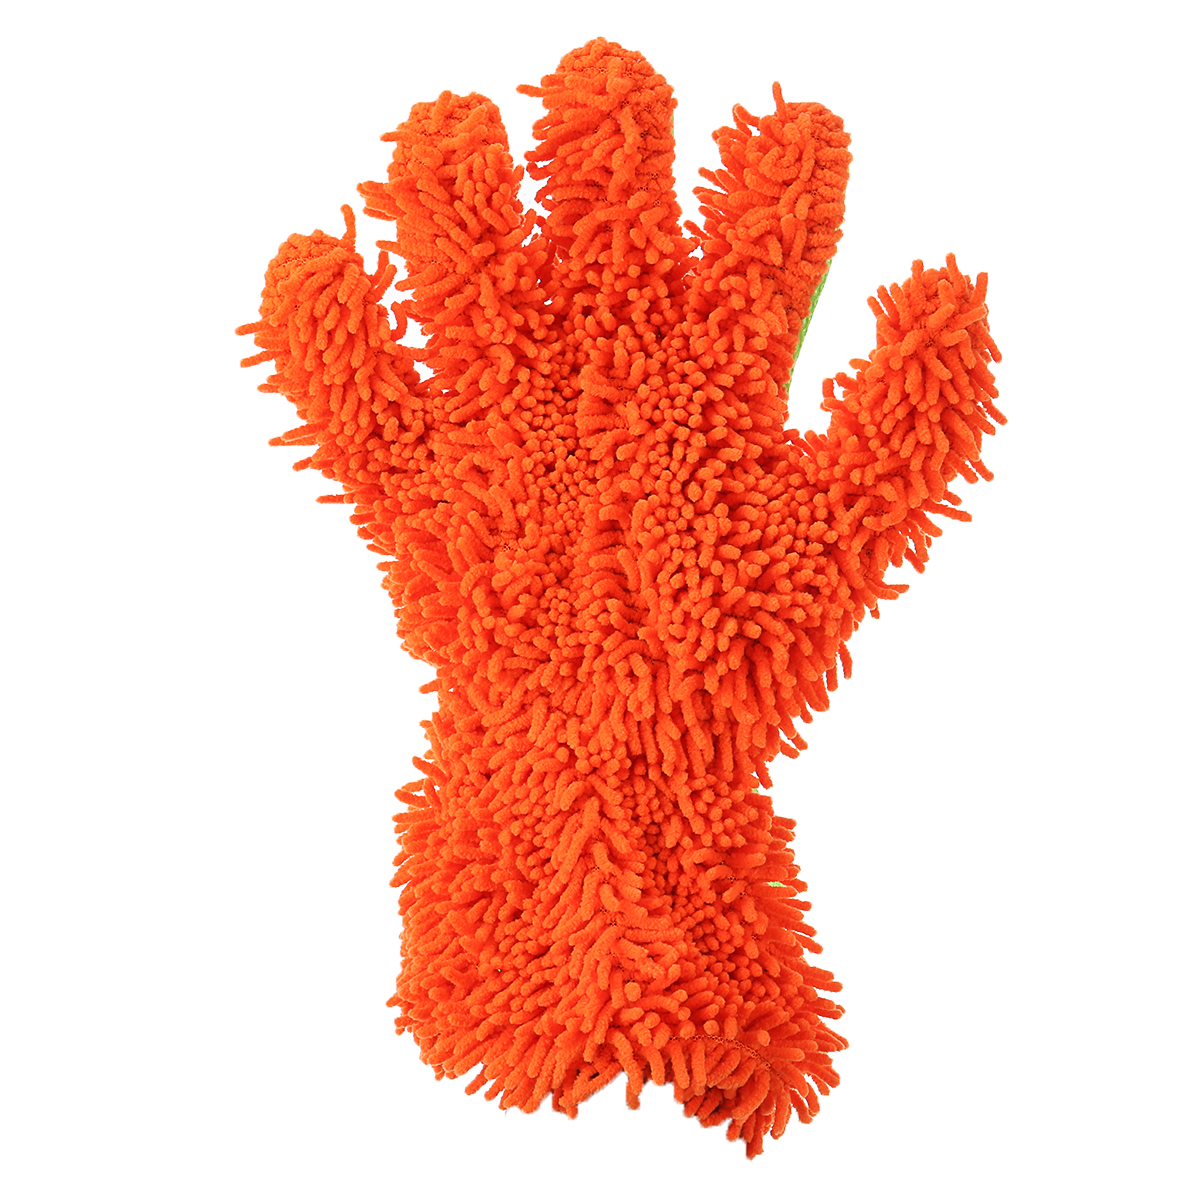 Five-finger Reusable Glove Coral Chenille Clean Wipe Washing Vehicle Washing Cleaner Tool